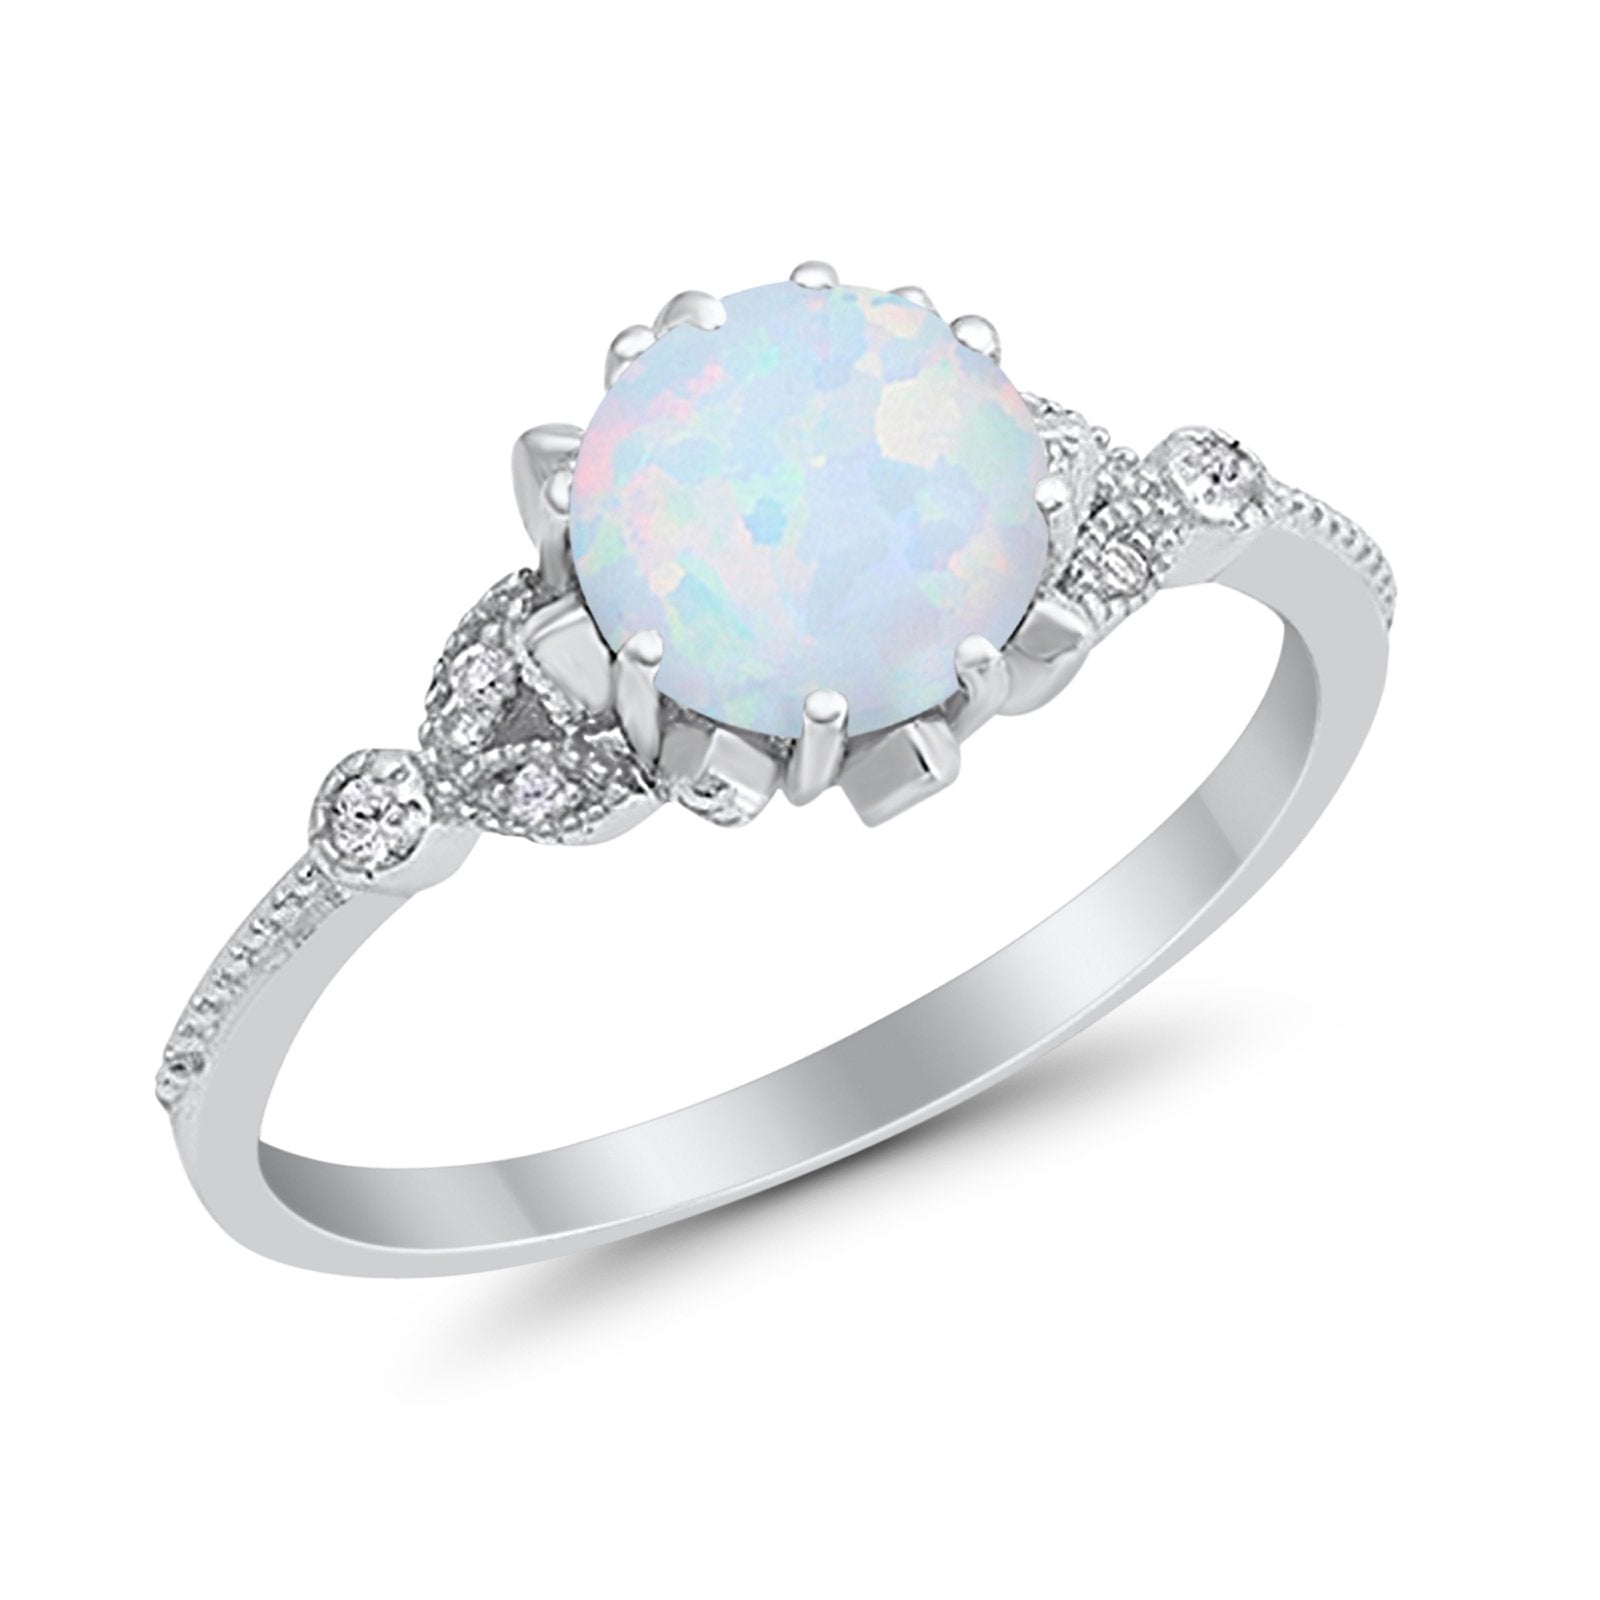 Art Deco Design Fashion Ring Lab Created White Opal 925 Sterling Silver